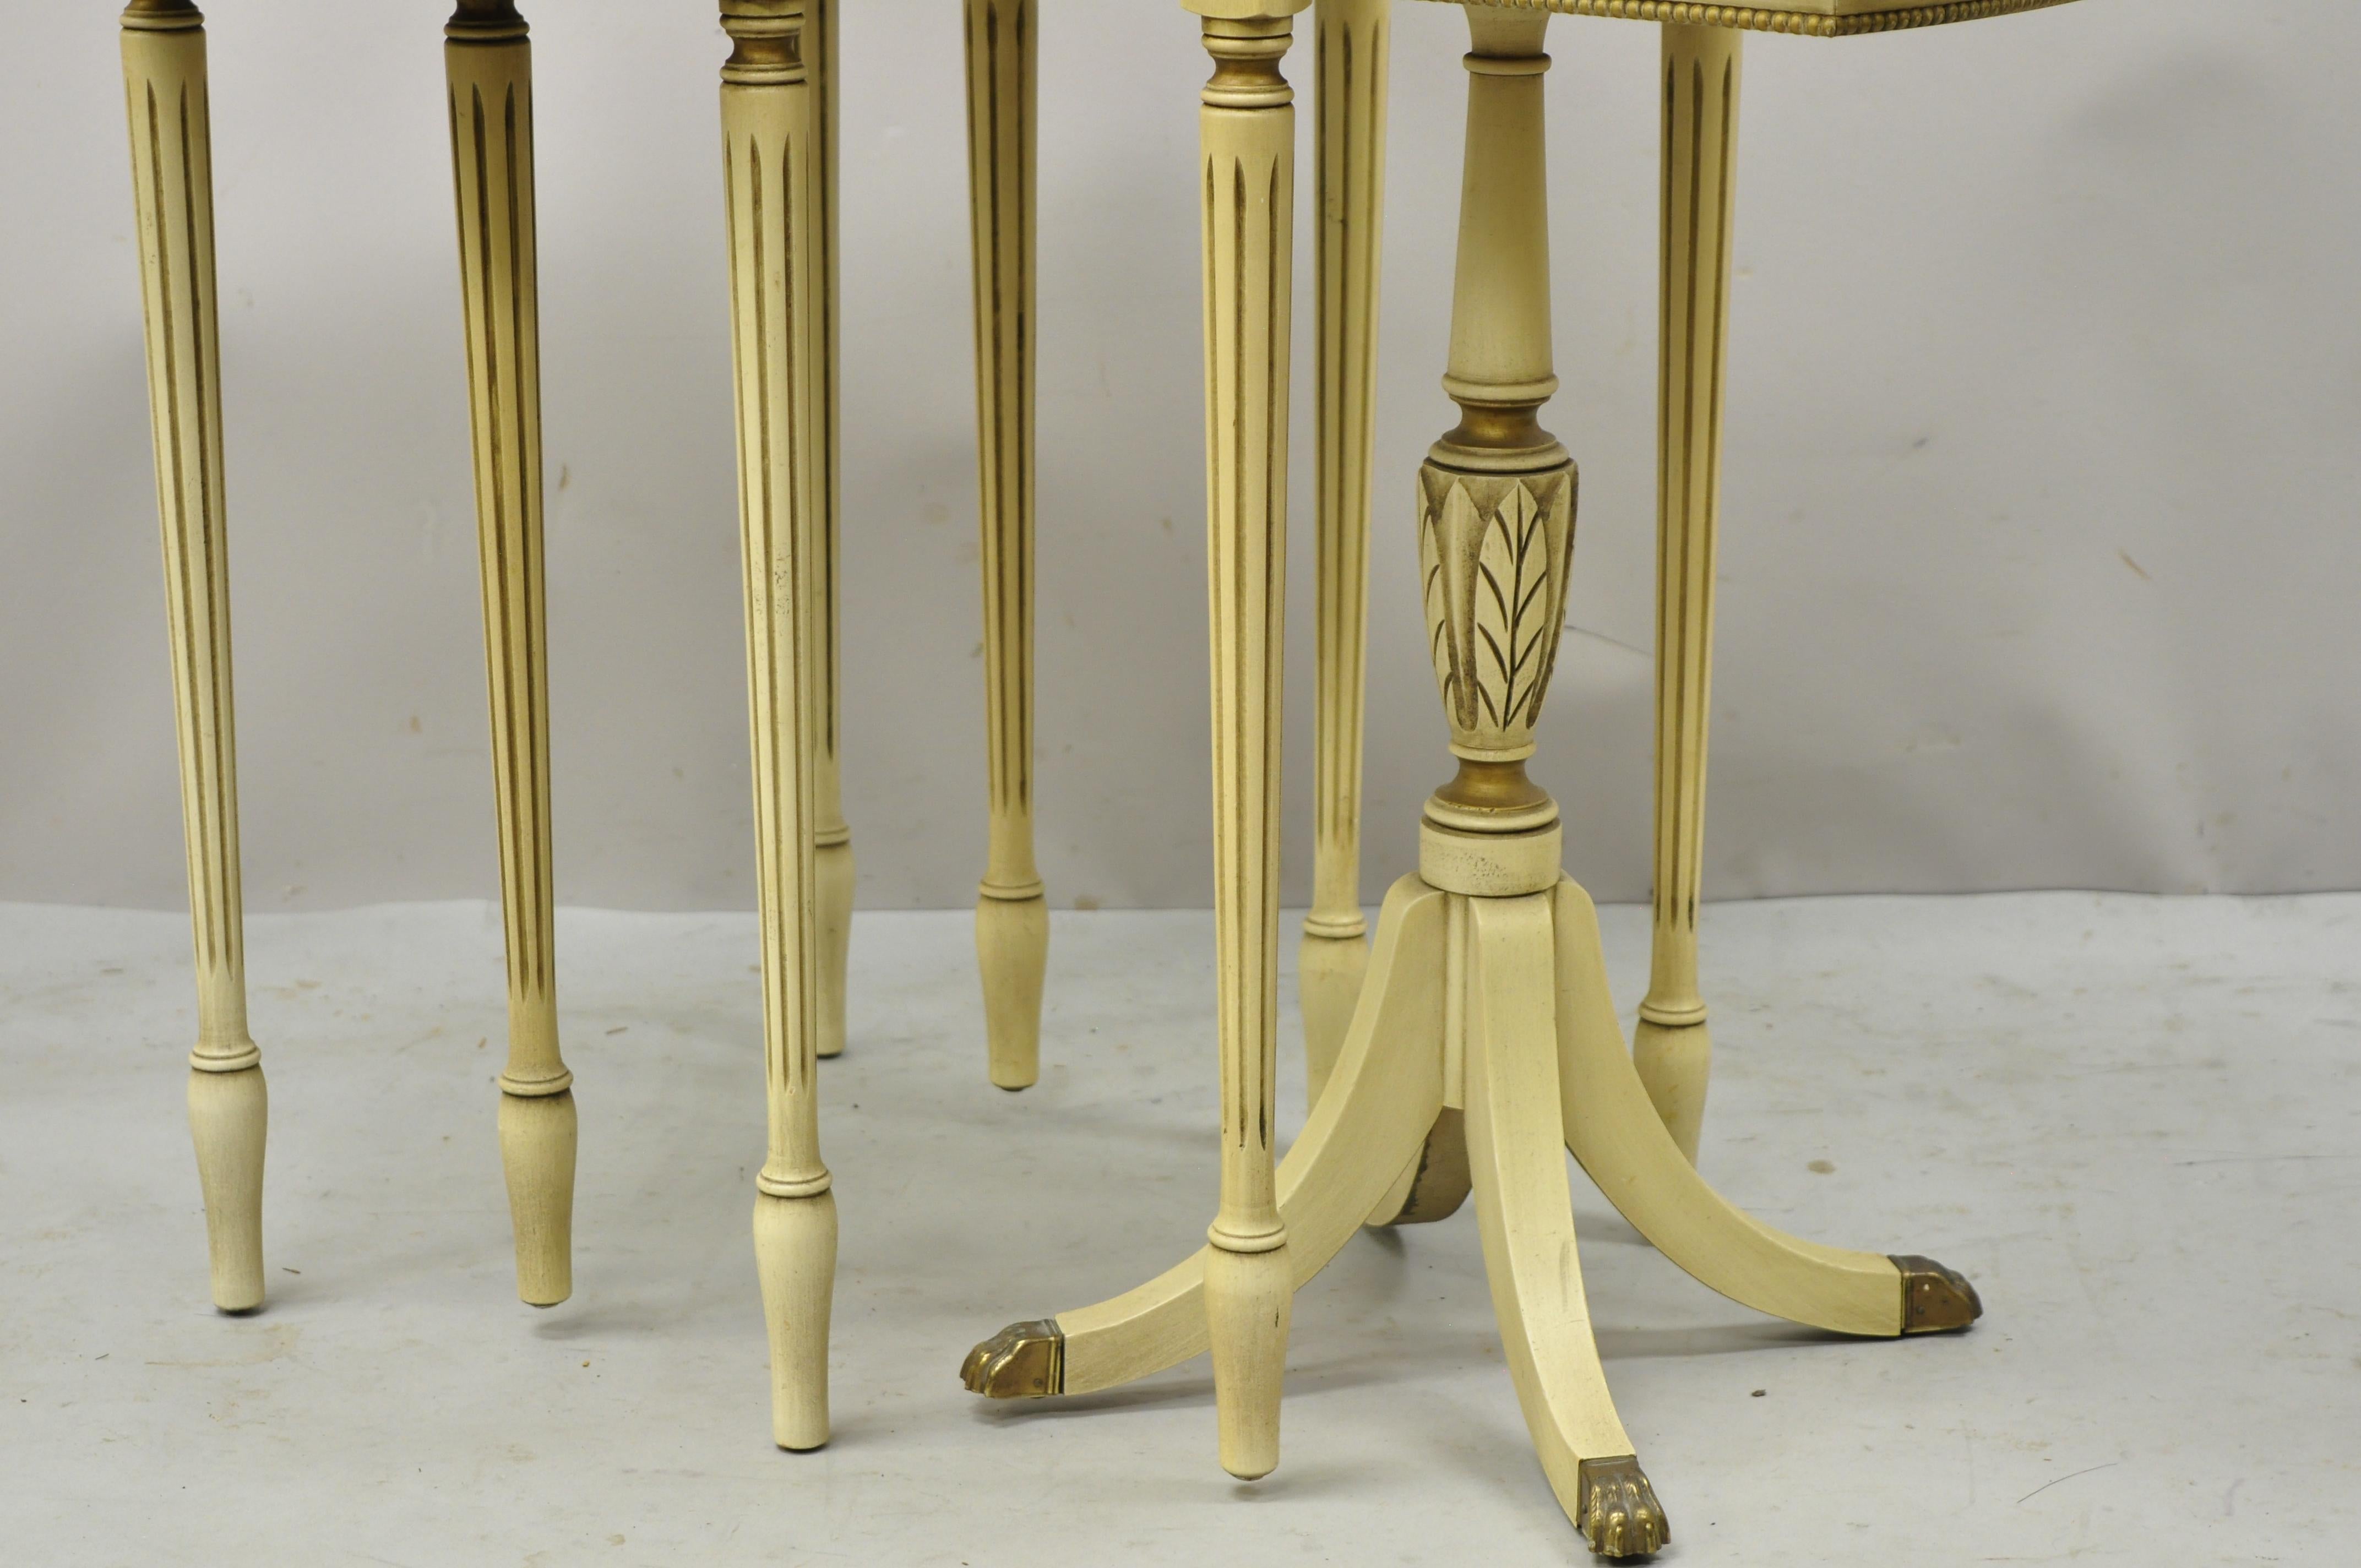 Wood Antique Cream Painted French Nesting Side Table Imperial Grand Rapids, Set of 3